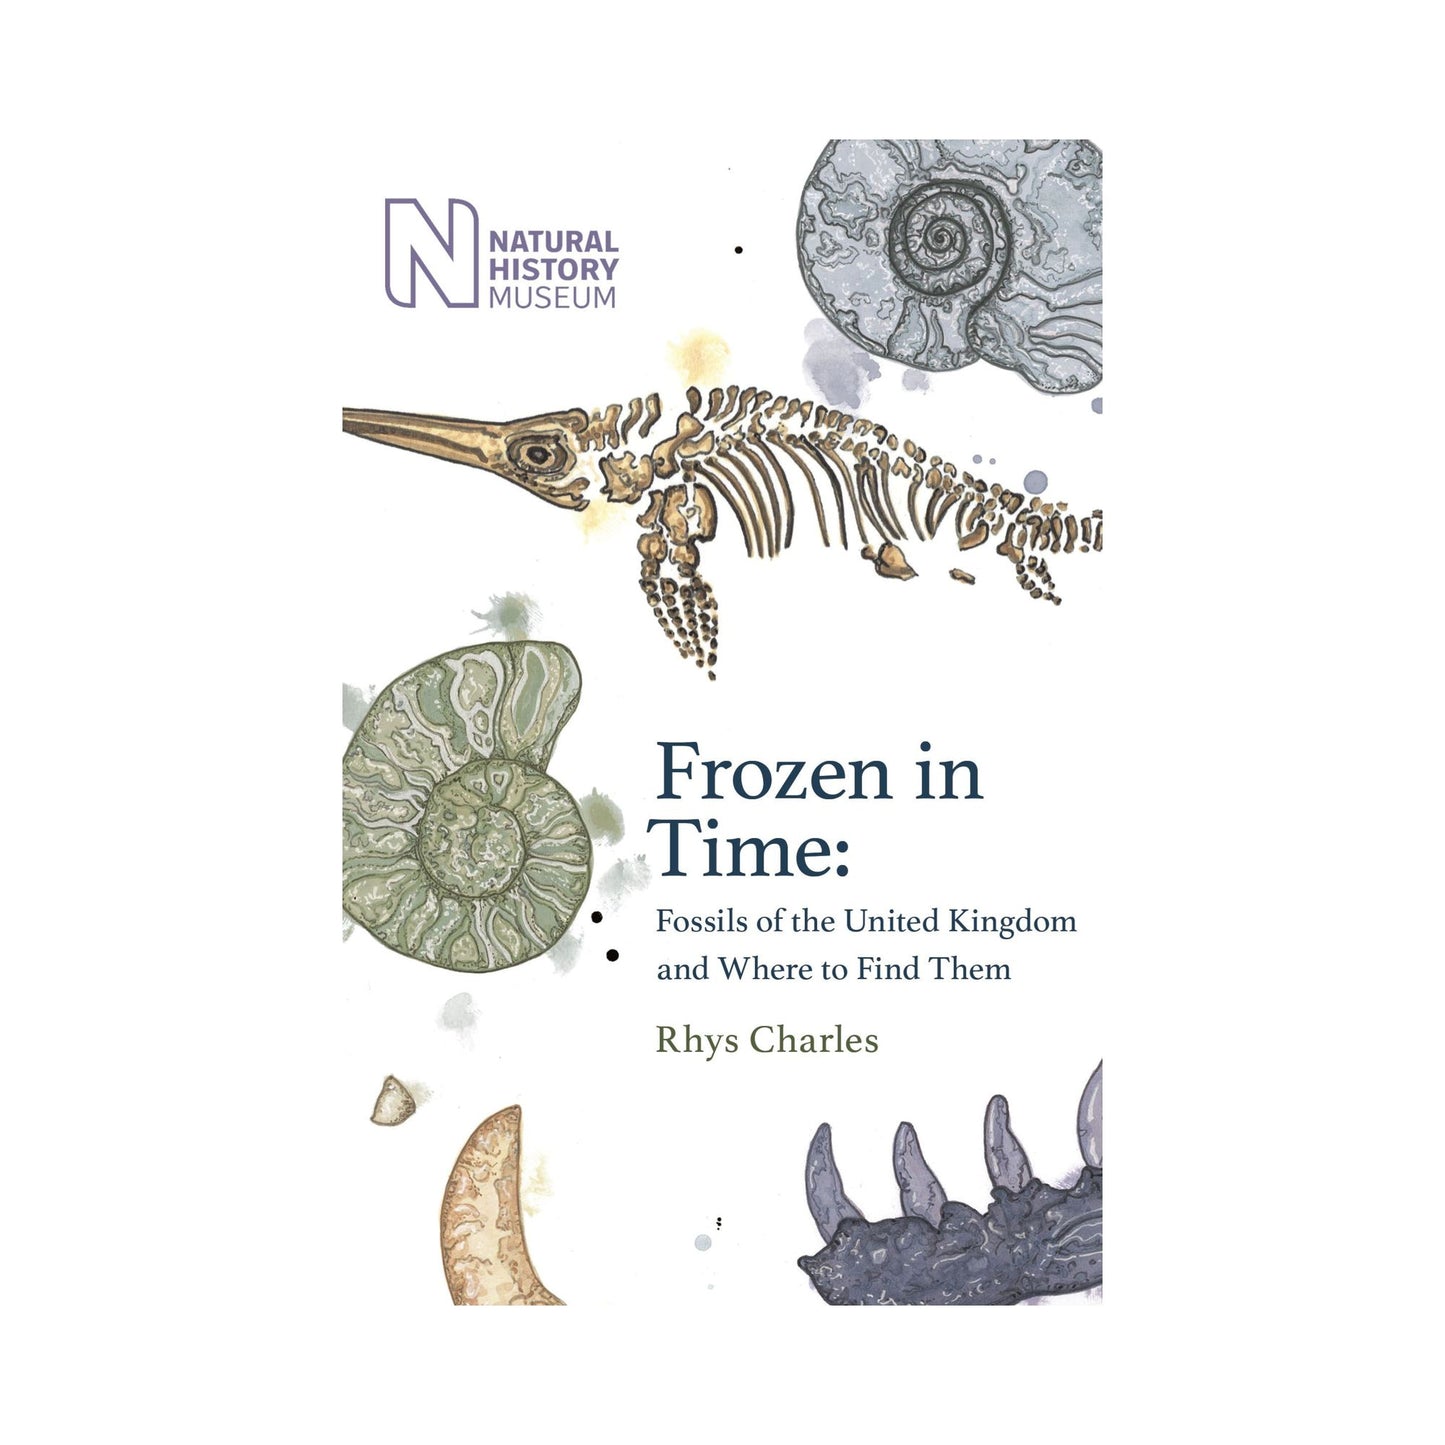 Frozen in Time: Fossils of Great Britain